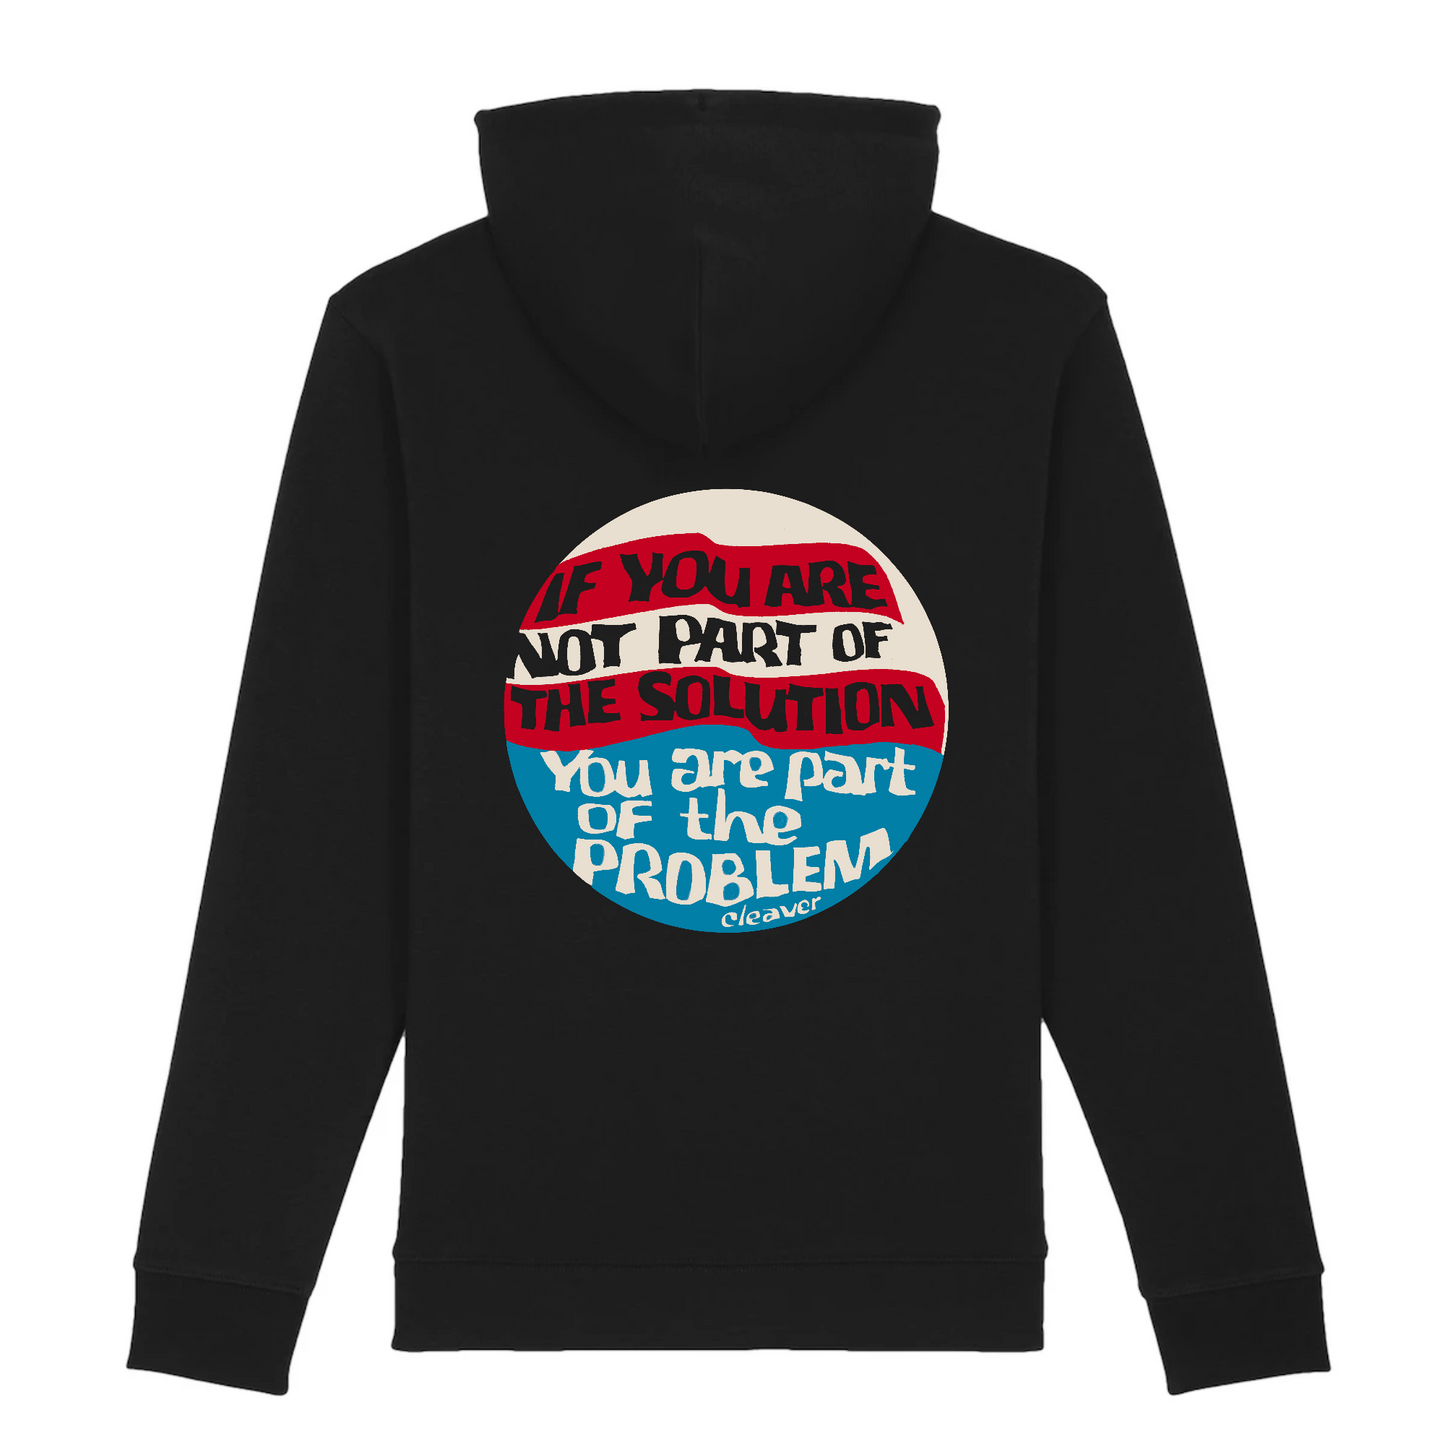 If You Are Not Part of The Solution, You Are Part of The Problem, Eldridge Cleaver - Hoodie (Graphic on Back)